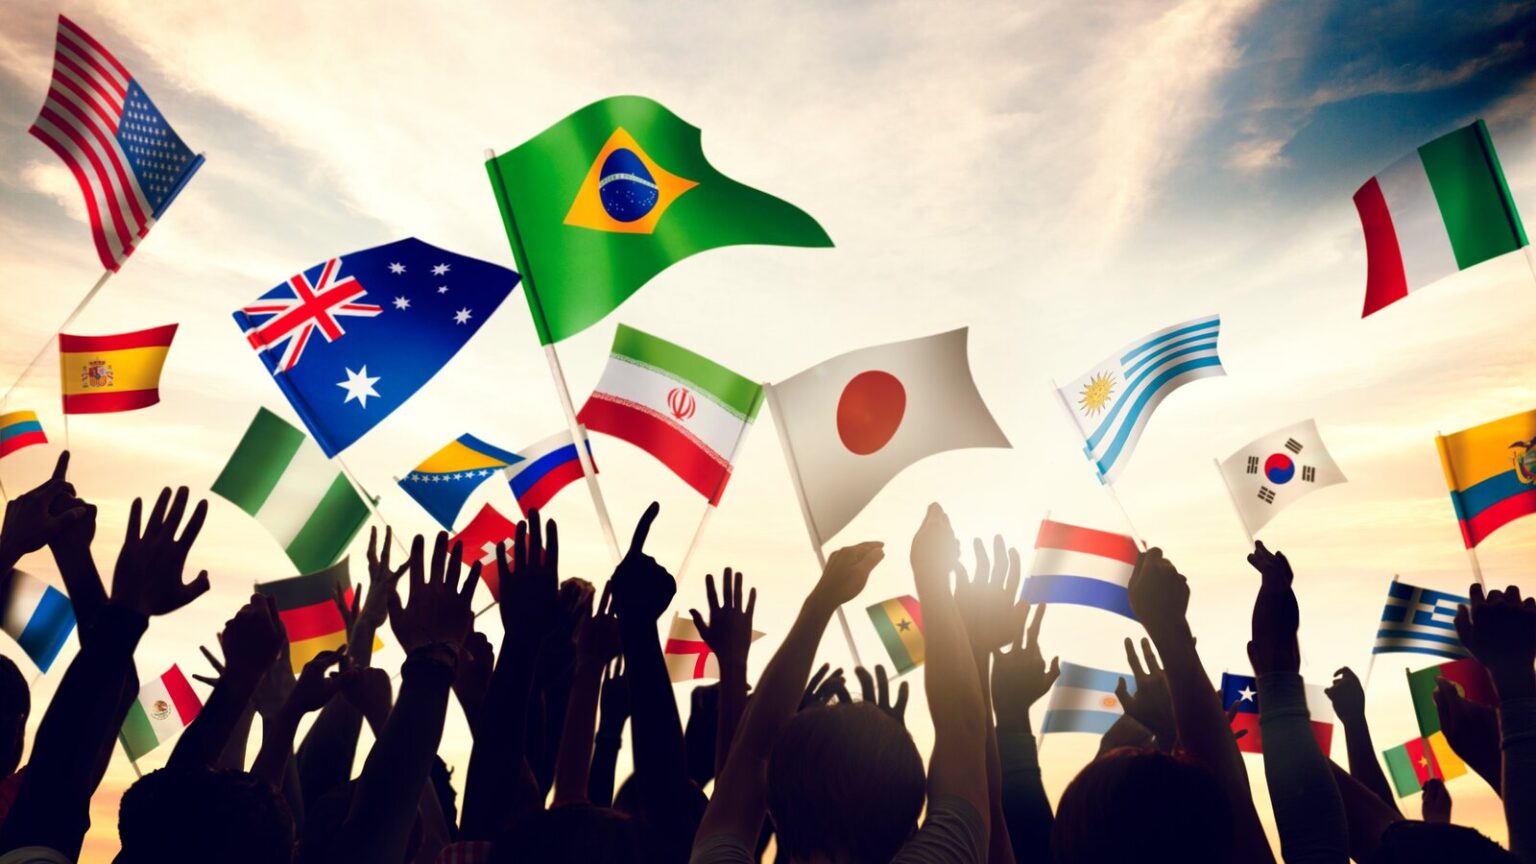 Group Of People Waving Flags at the World Cup